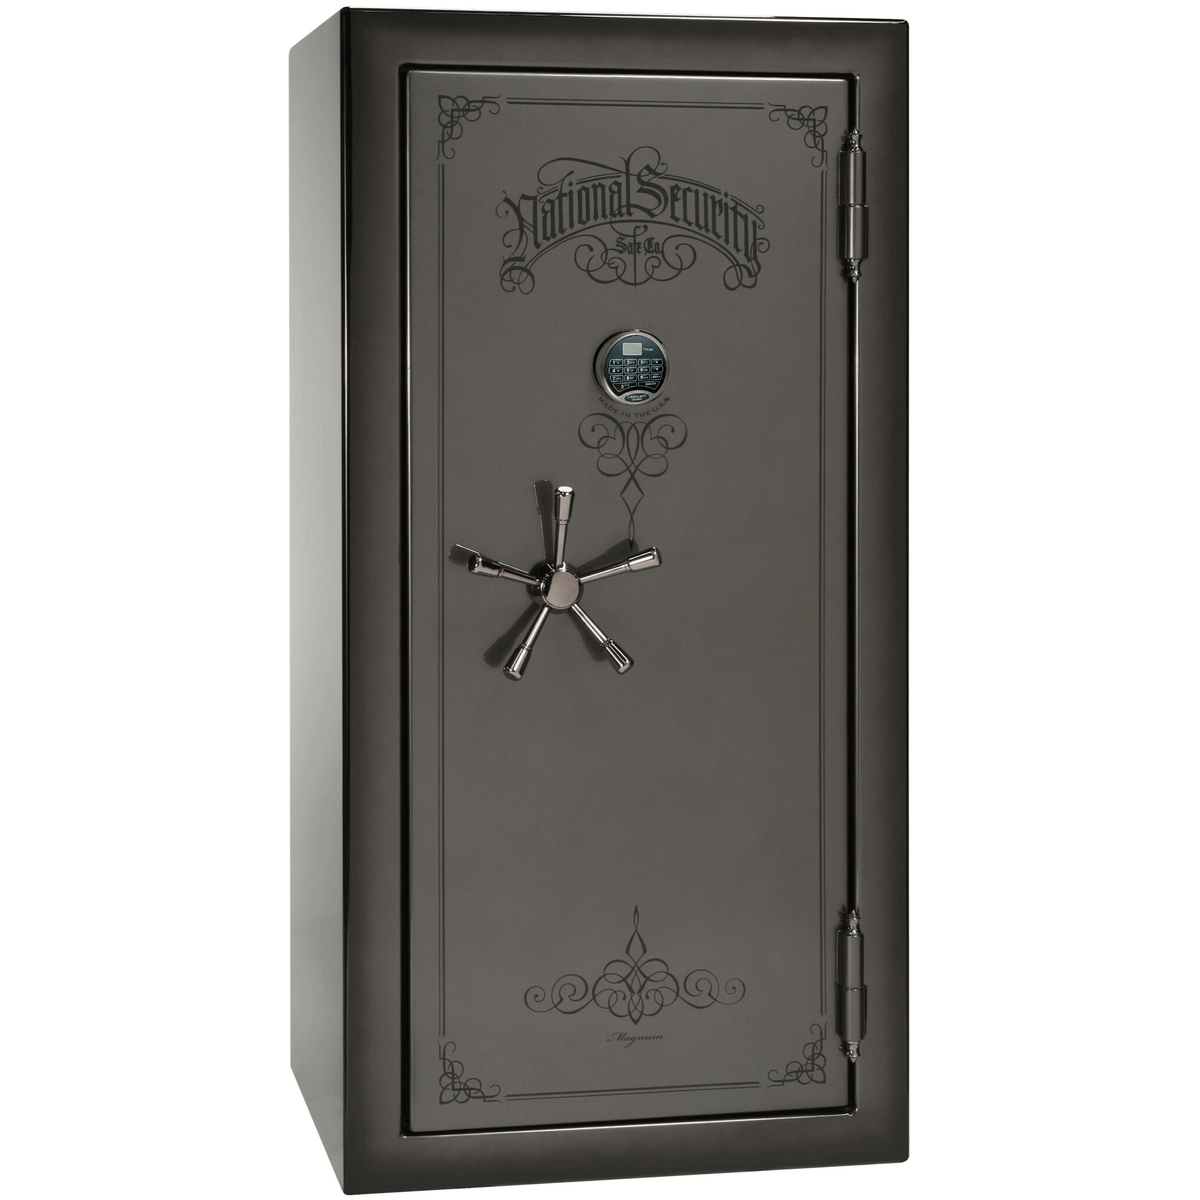 Liberty Safe National Magnum 25 in Gray Charcoal Feathered Edge Gloss with Black Chrome Electronic Lock, closed door.